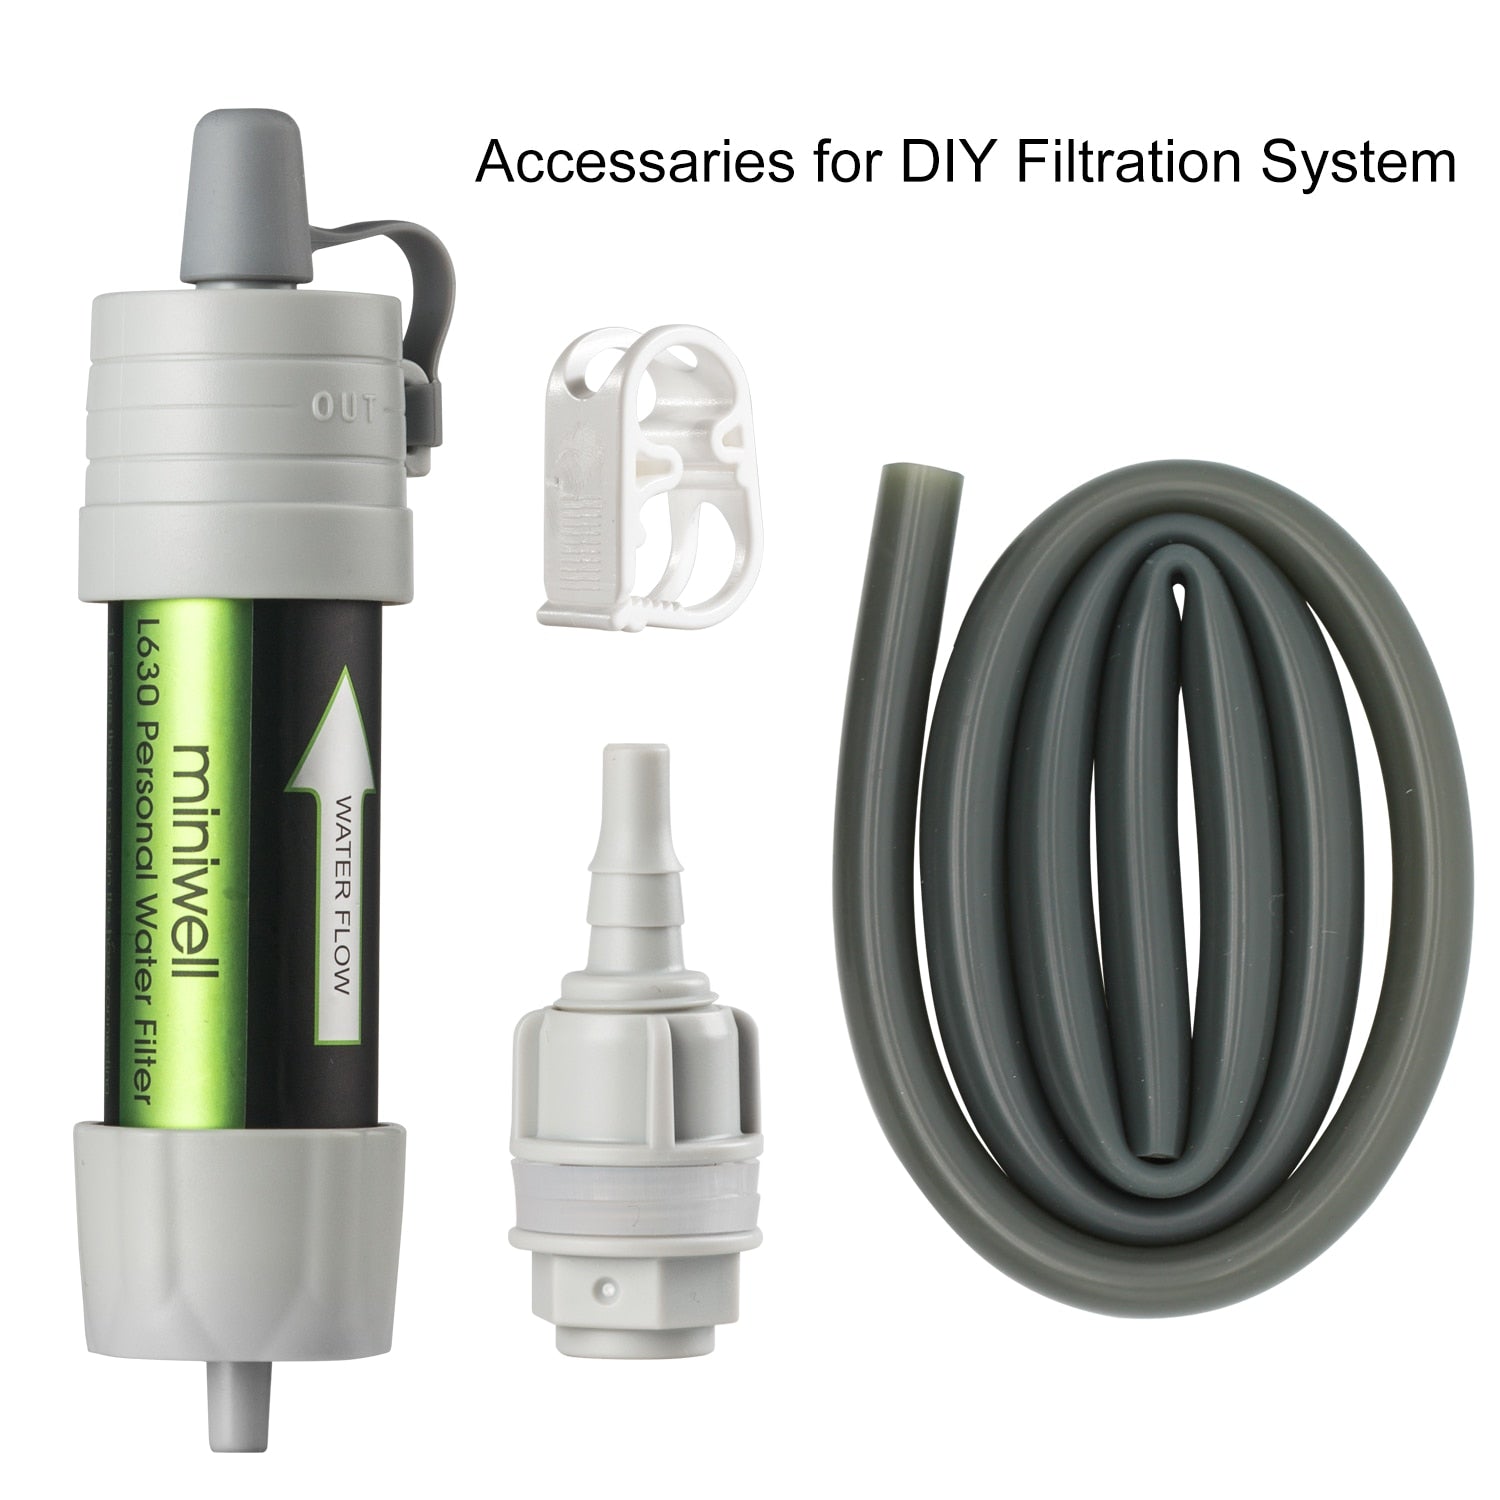 Kits Miniwell L630 Draagbare Water Filter Apparatuur Voor Militaire Survival